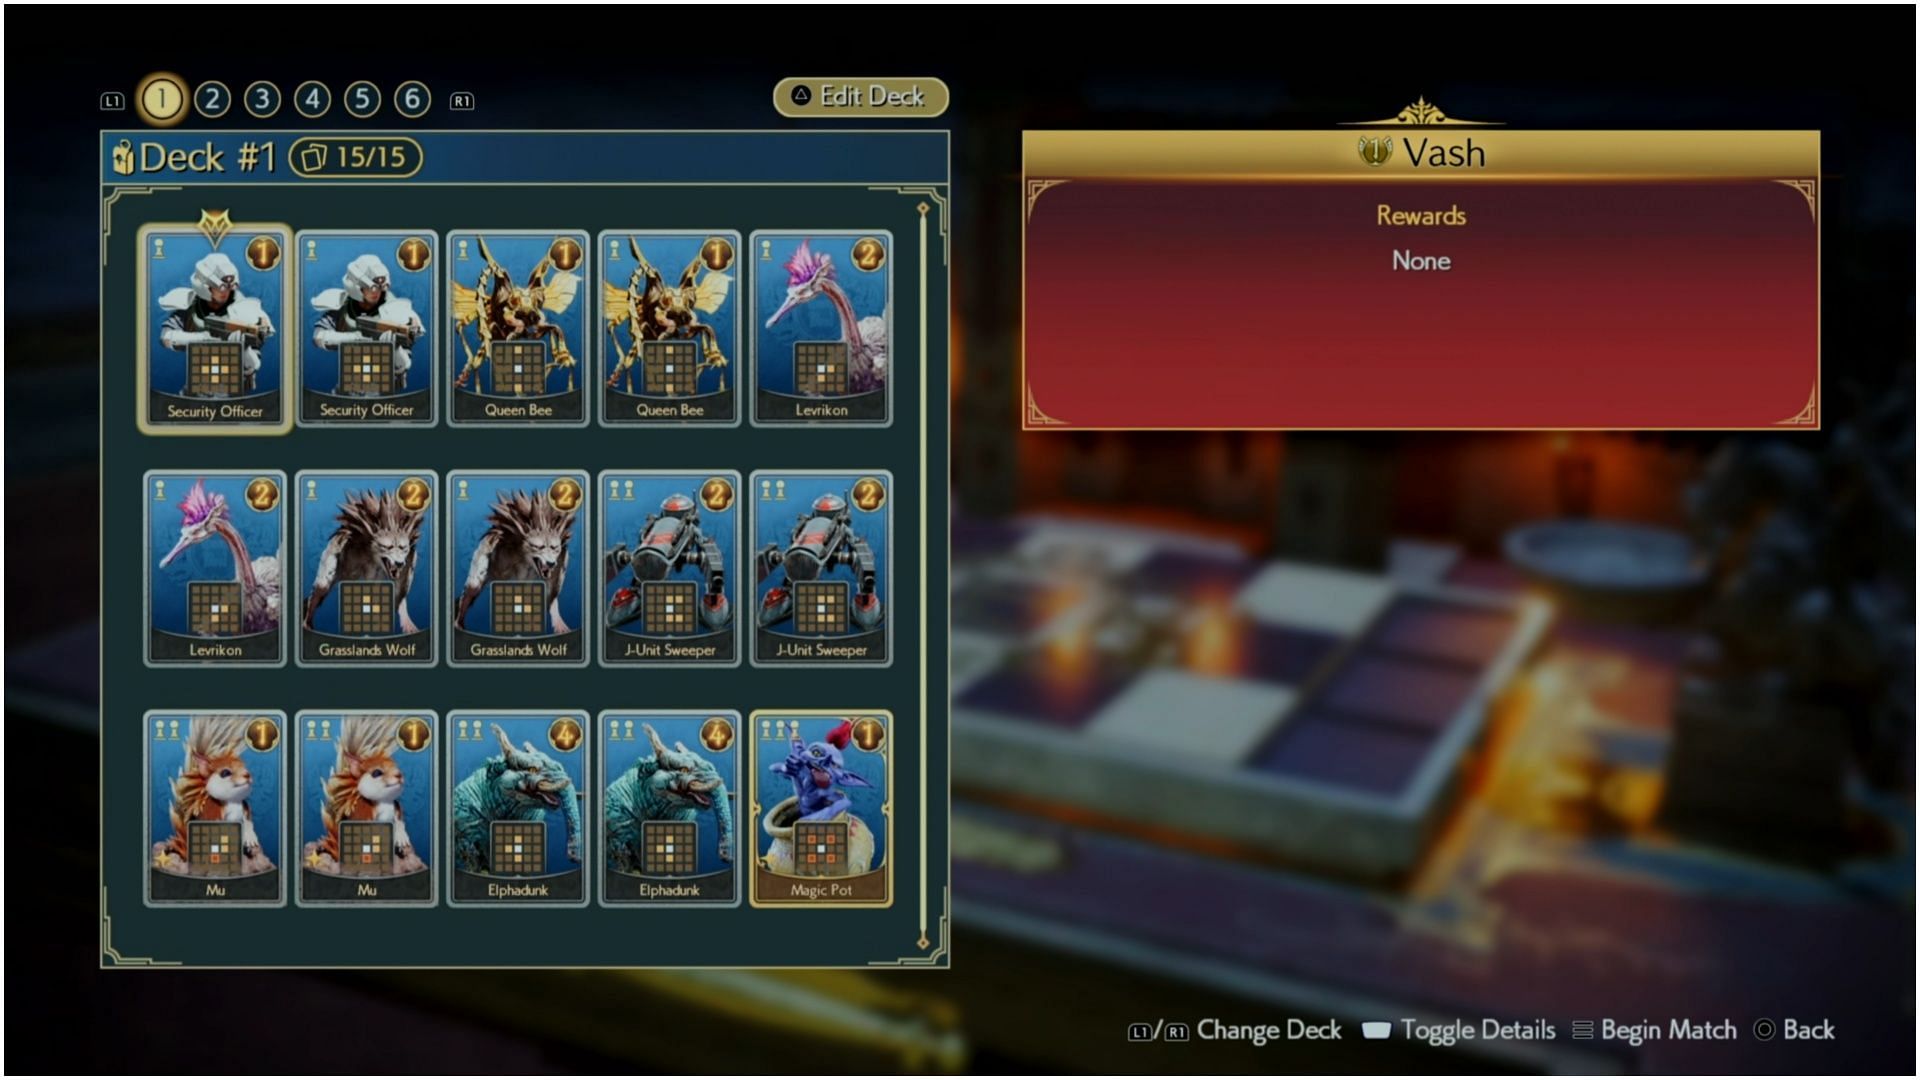 Just use the basic deck, it works well enough (Image via Square Enix)